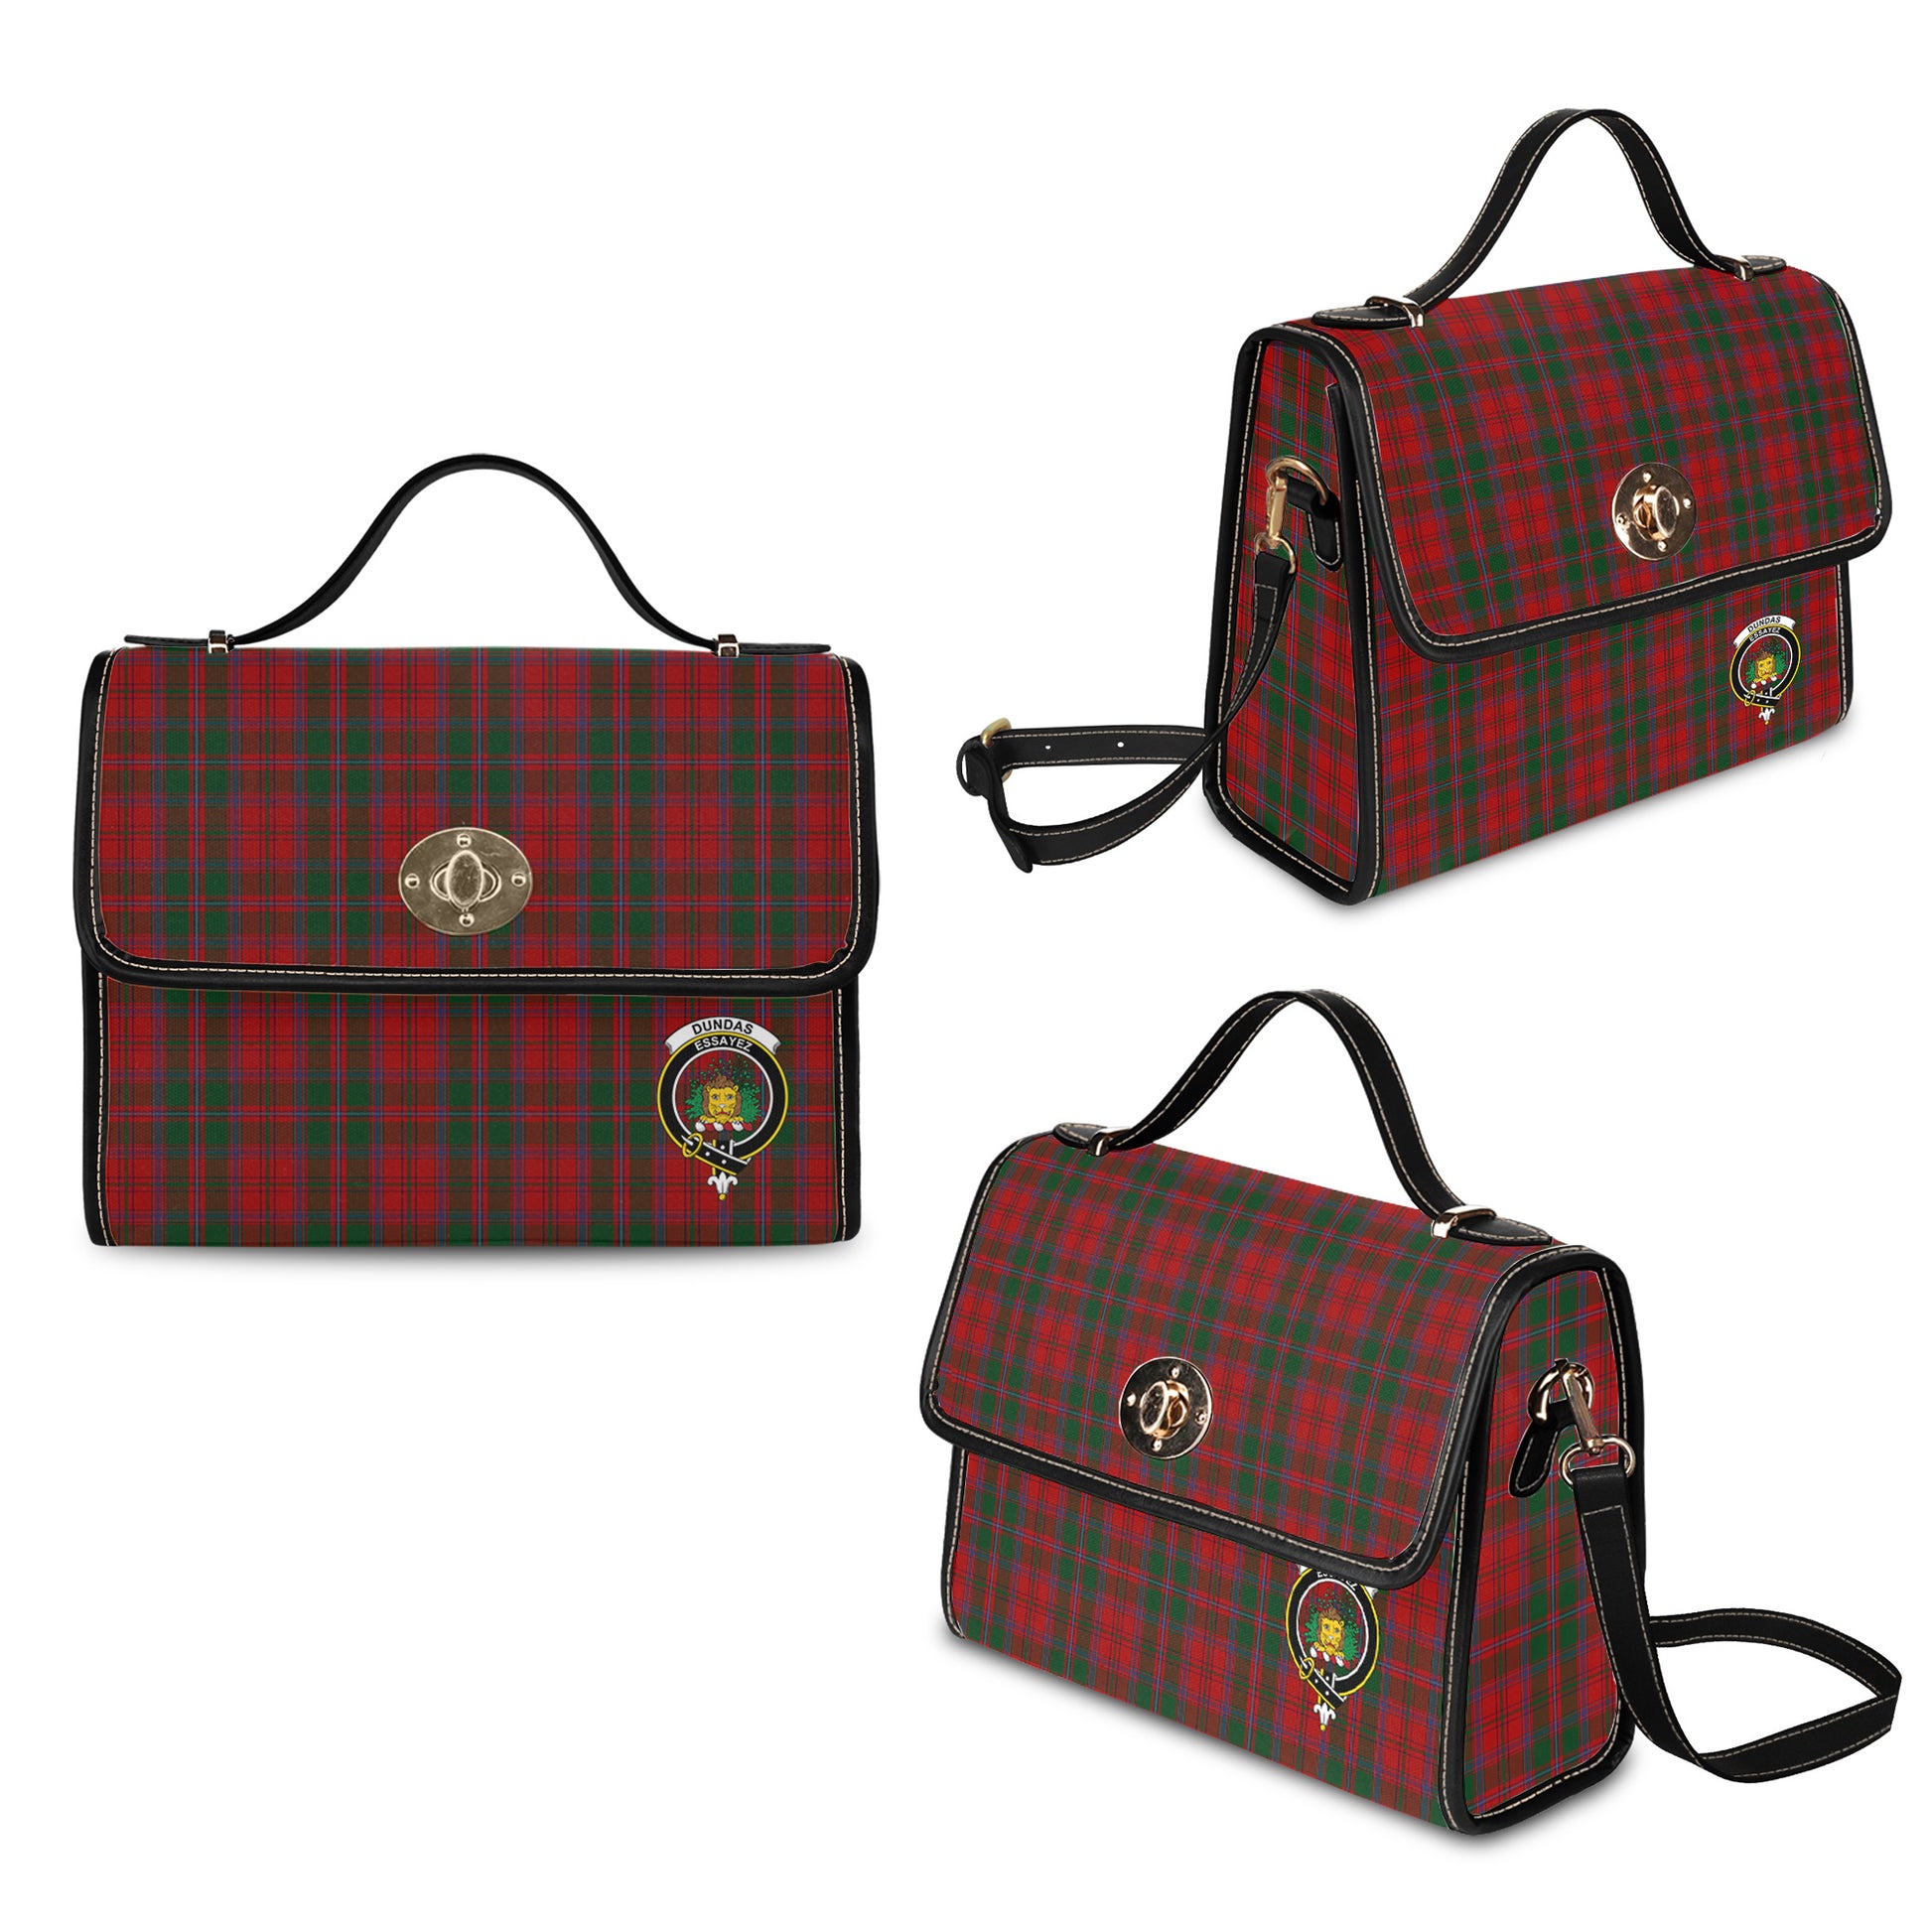 dundas-red-tartan-leather-strap-waterproof-canvas-bag-with-family-crest